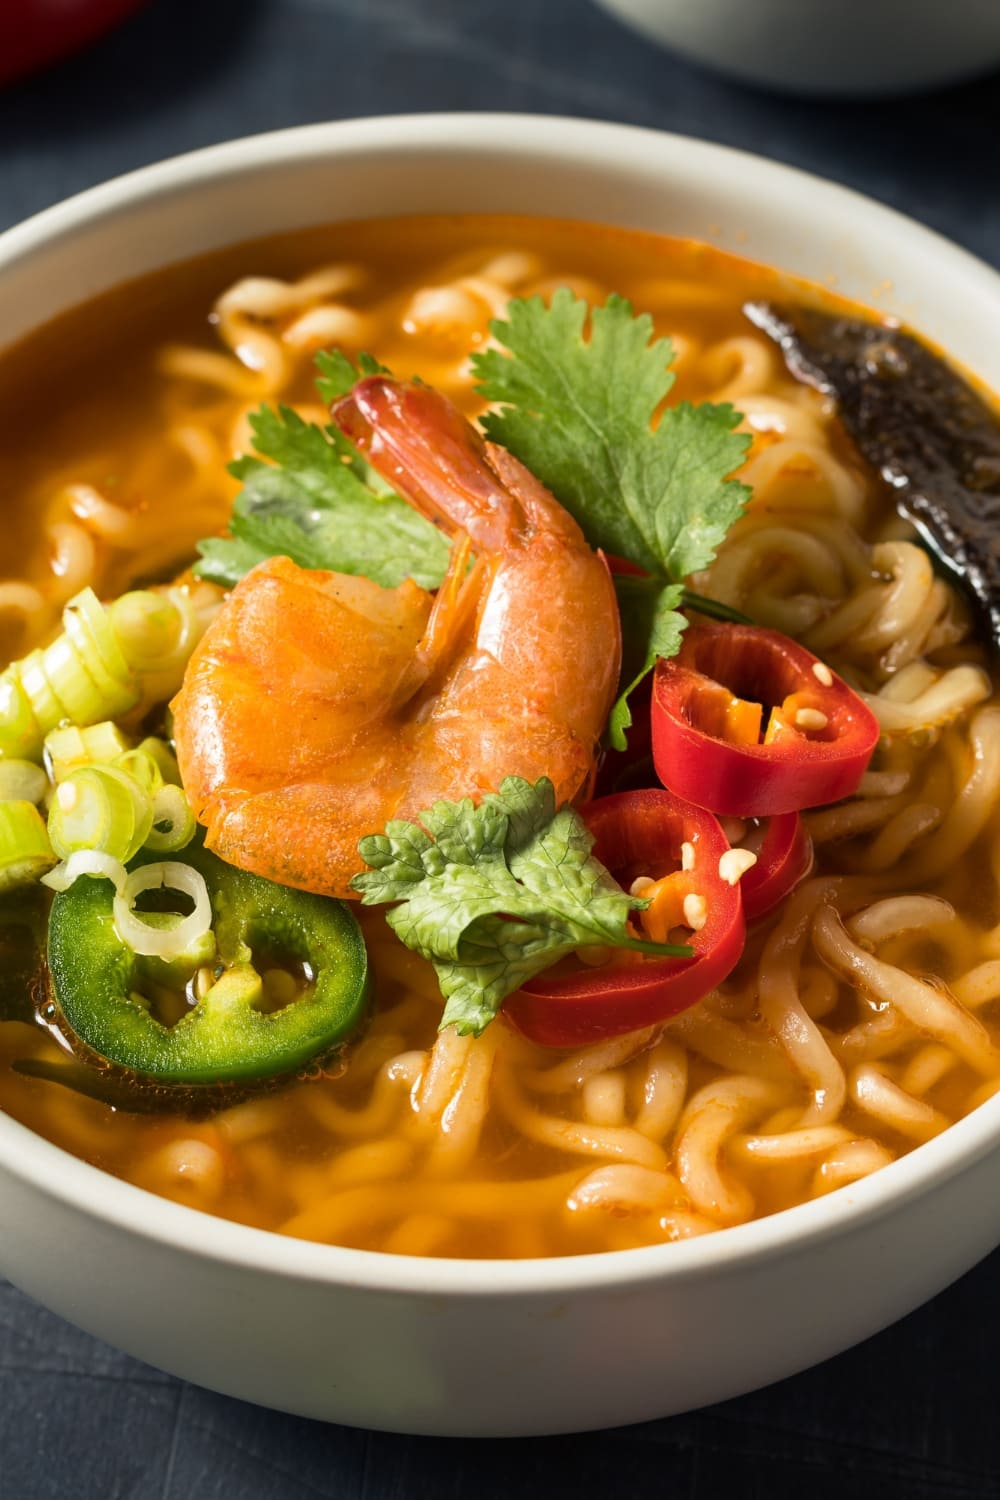 Spicy Seafood Ramen Noodle with Shrimp, Dried Seaweed, Fresh Parsley and Sliced Peppers